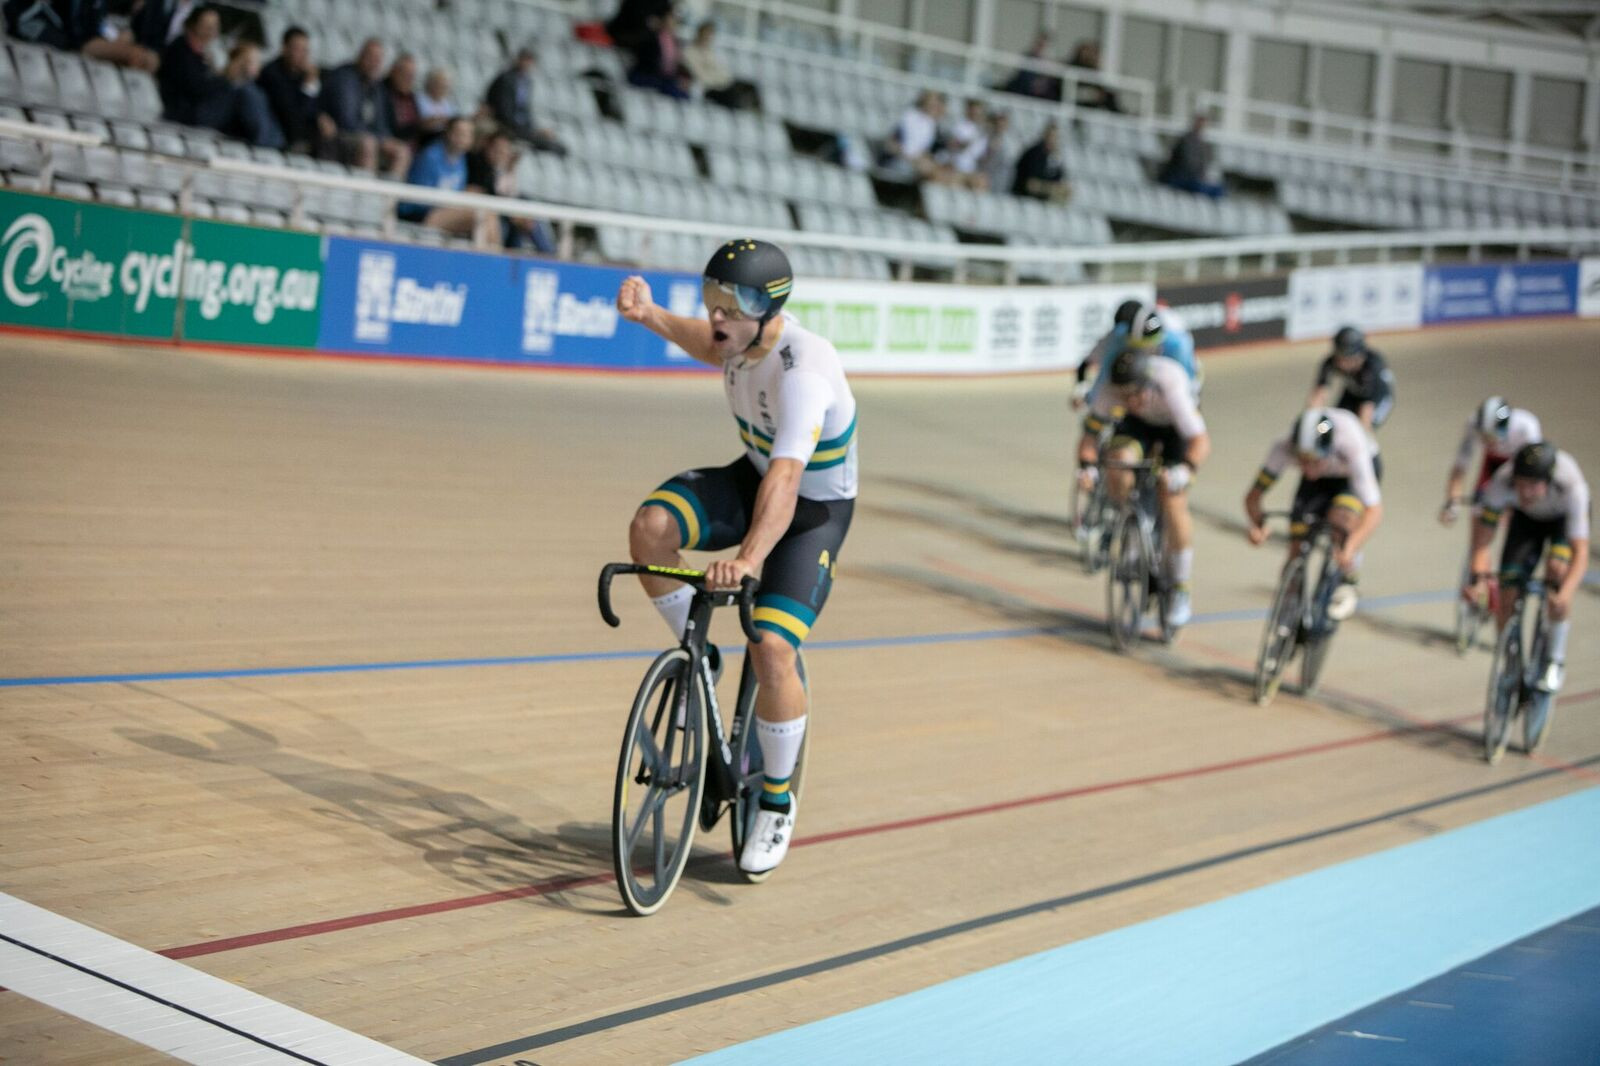 Two golds for Welsford as Australia dominate once more at Oceania Track Cycling Championships